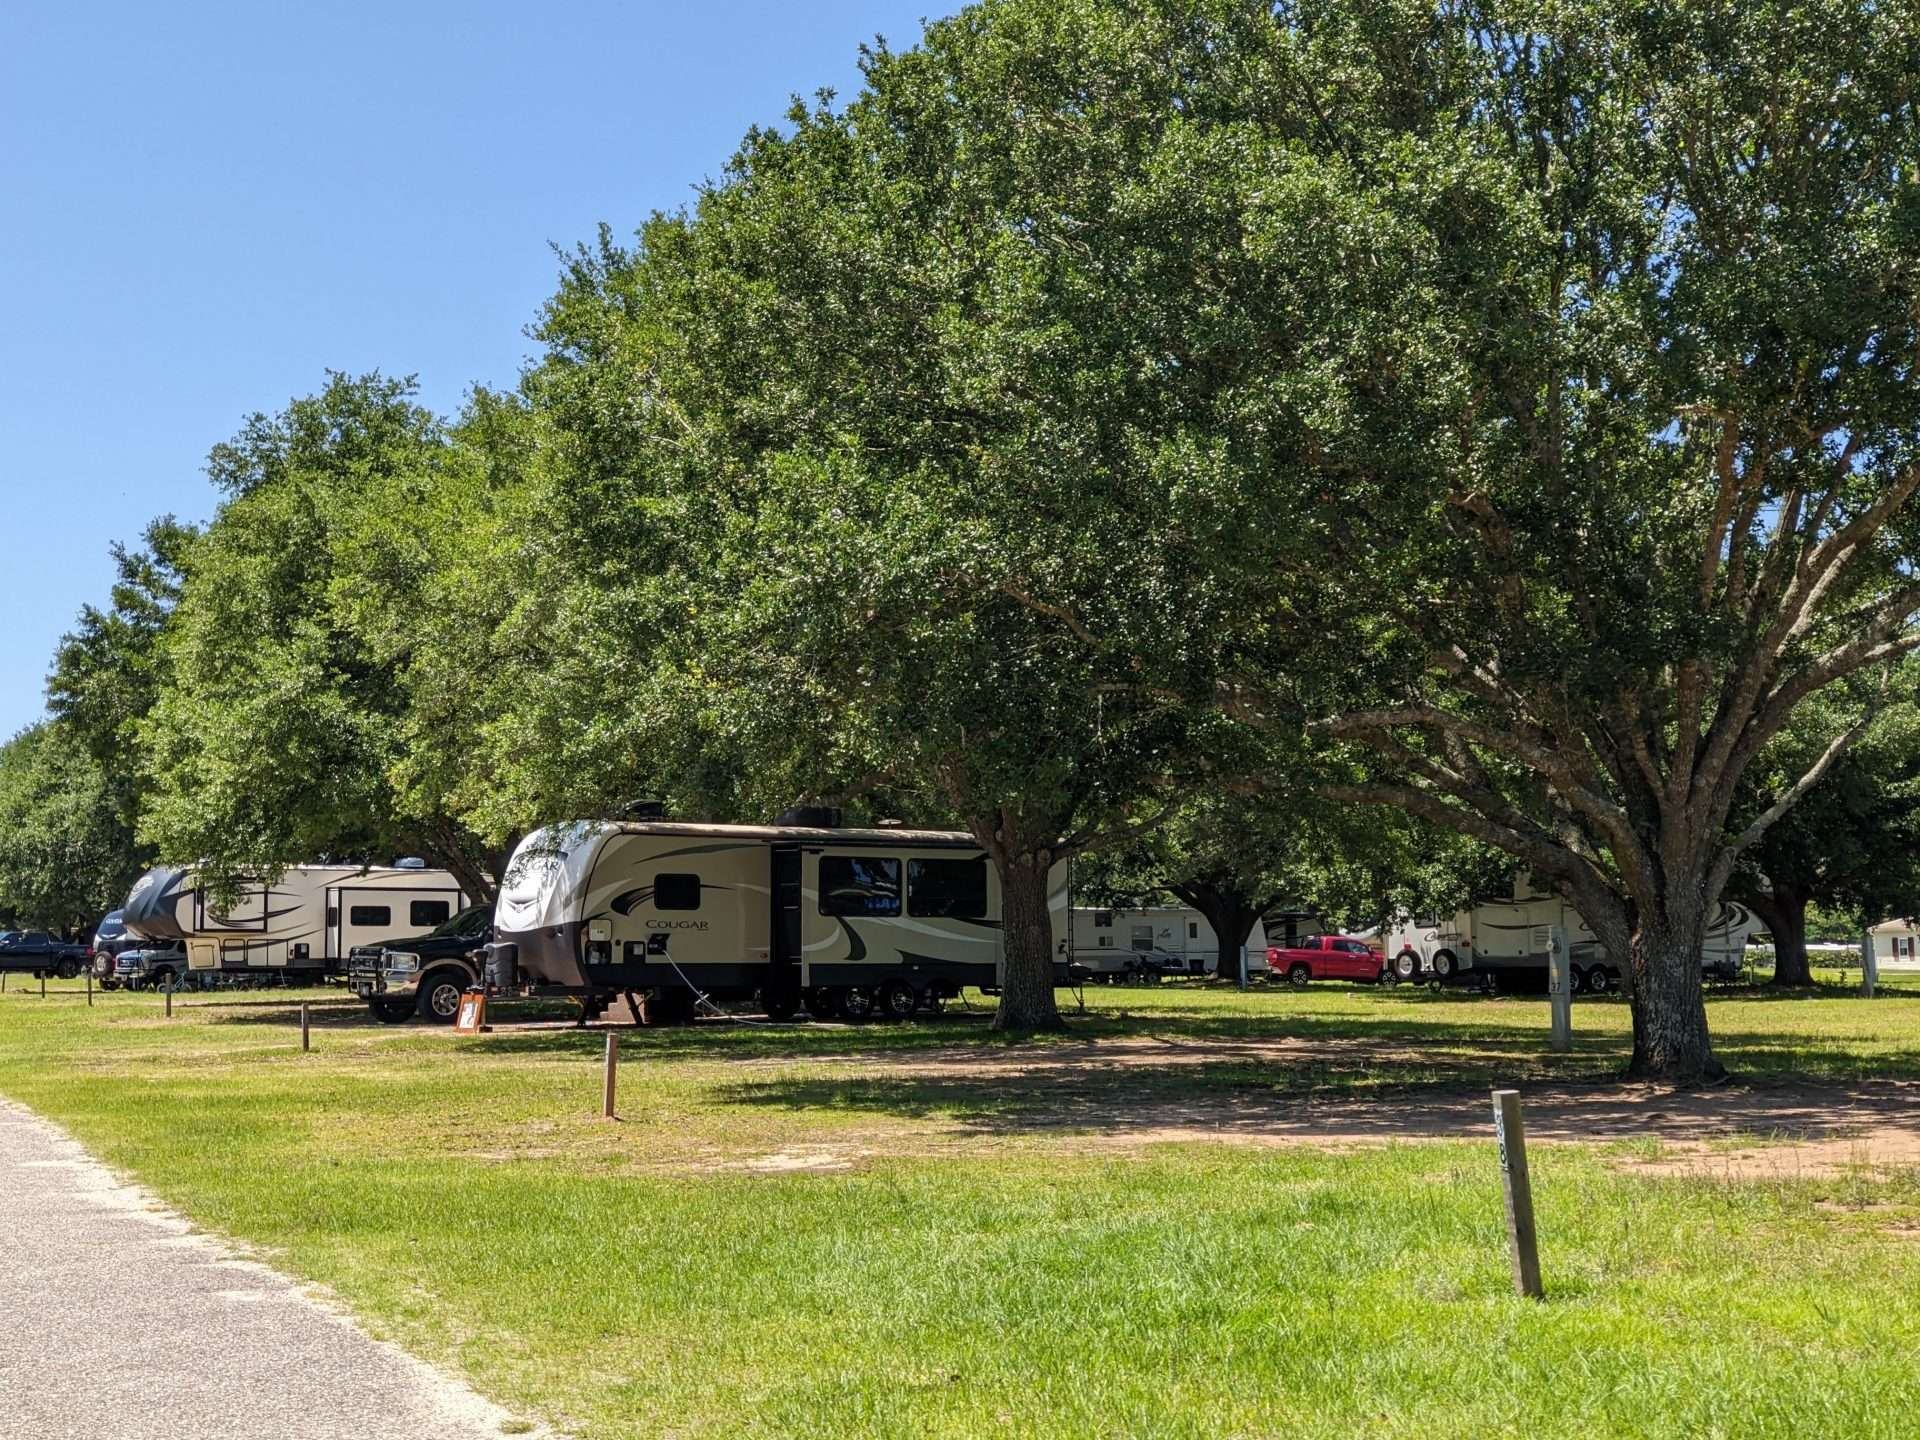 RVs parked amongst trees at campsites.